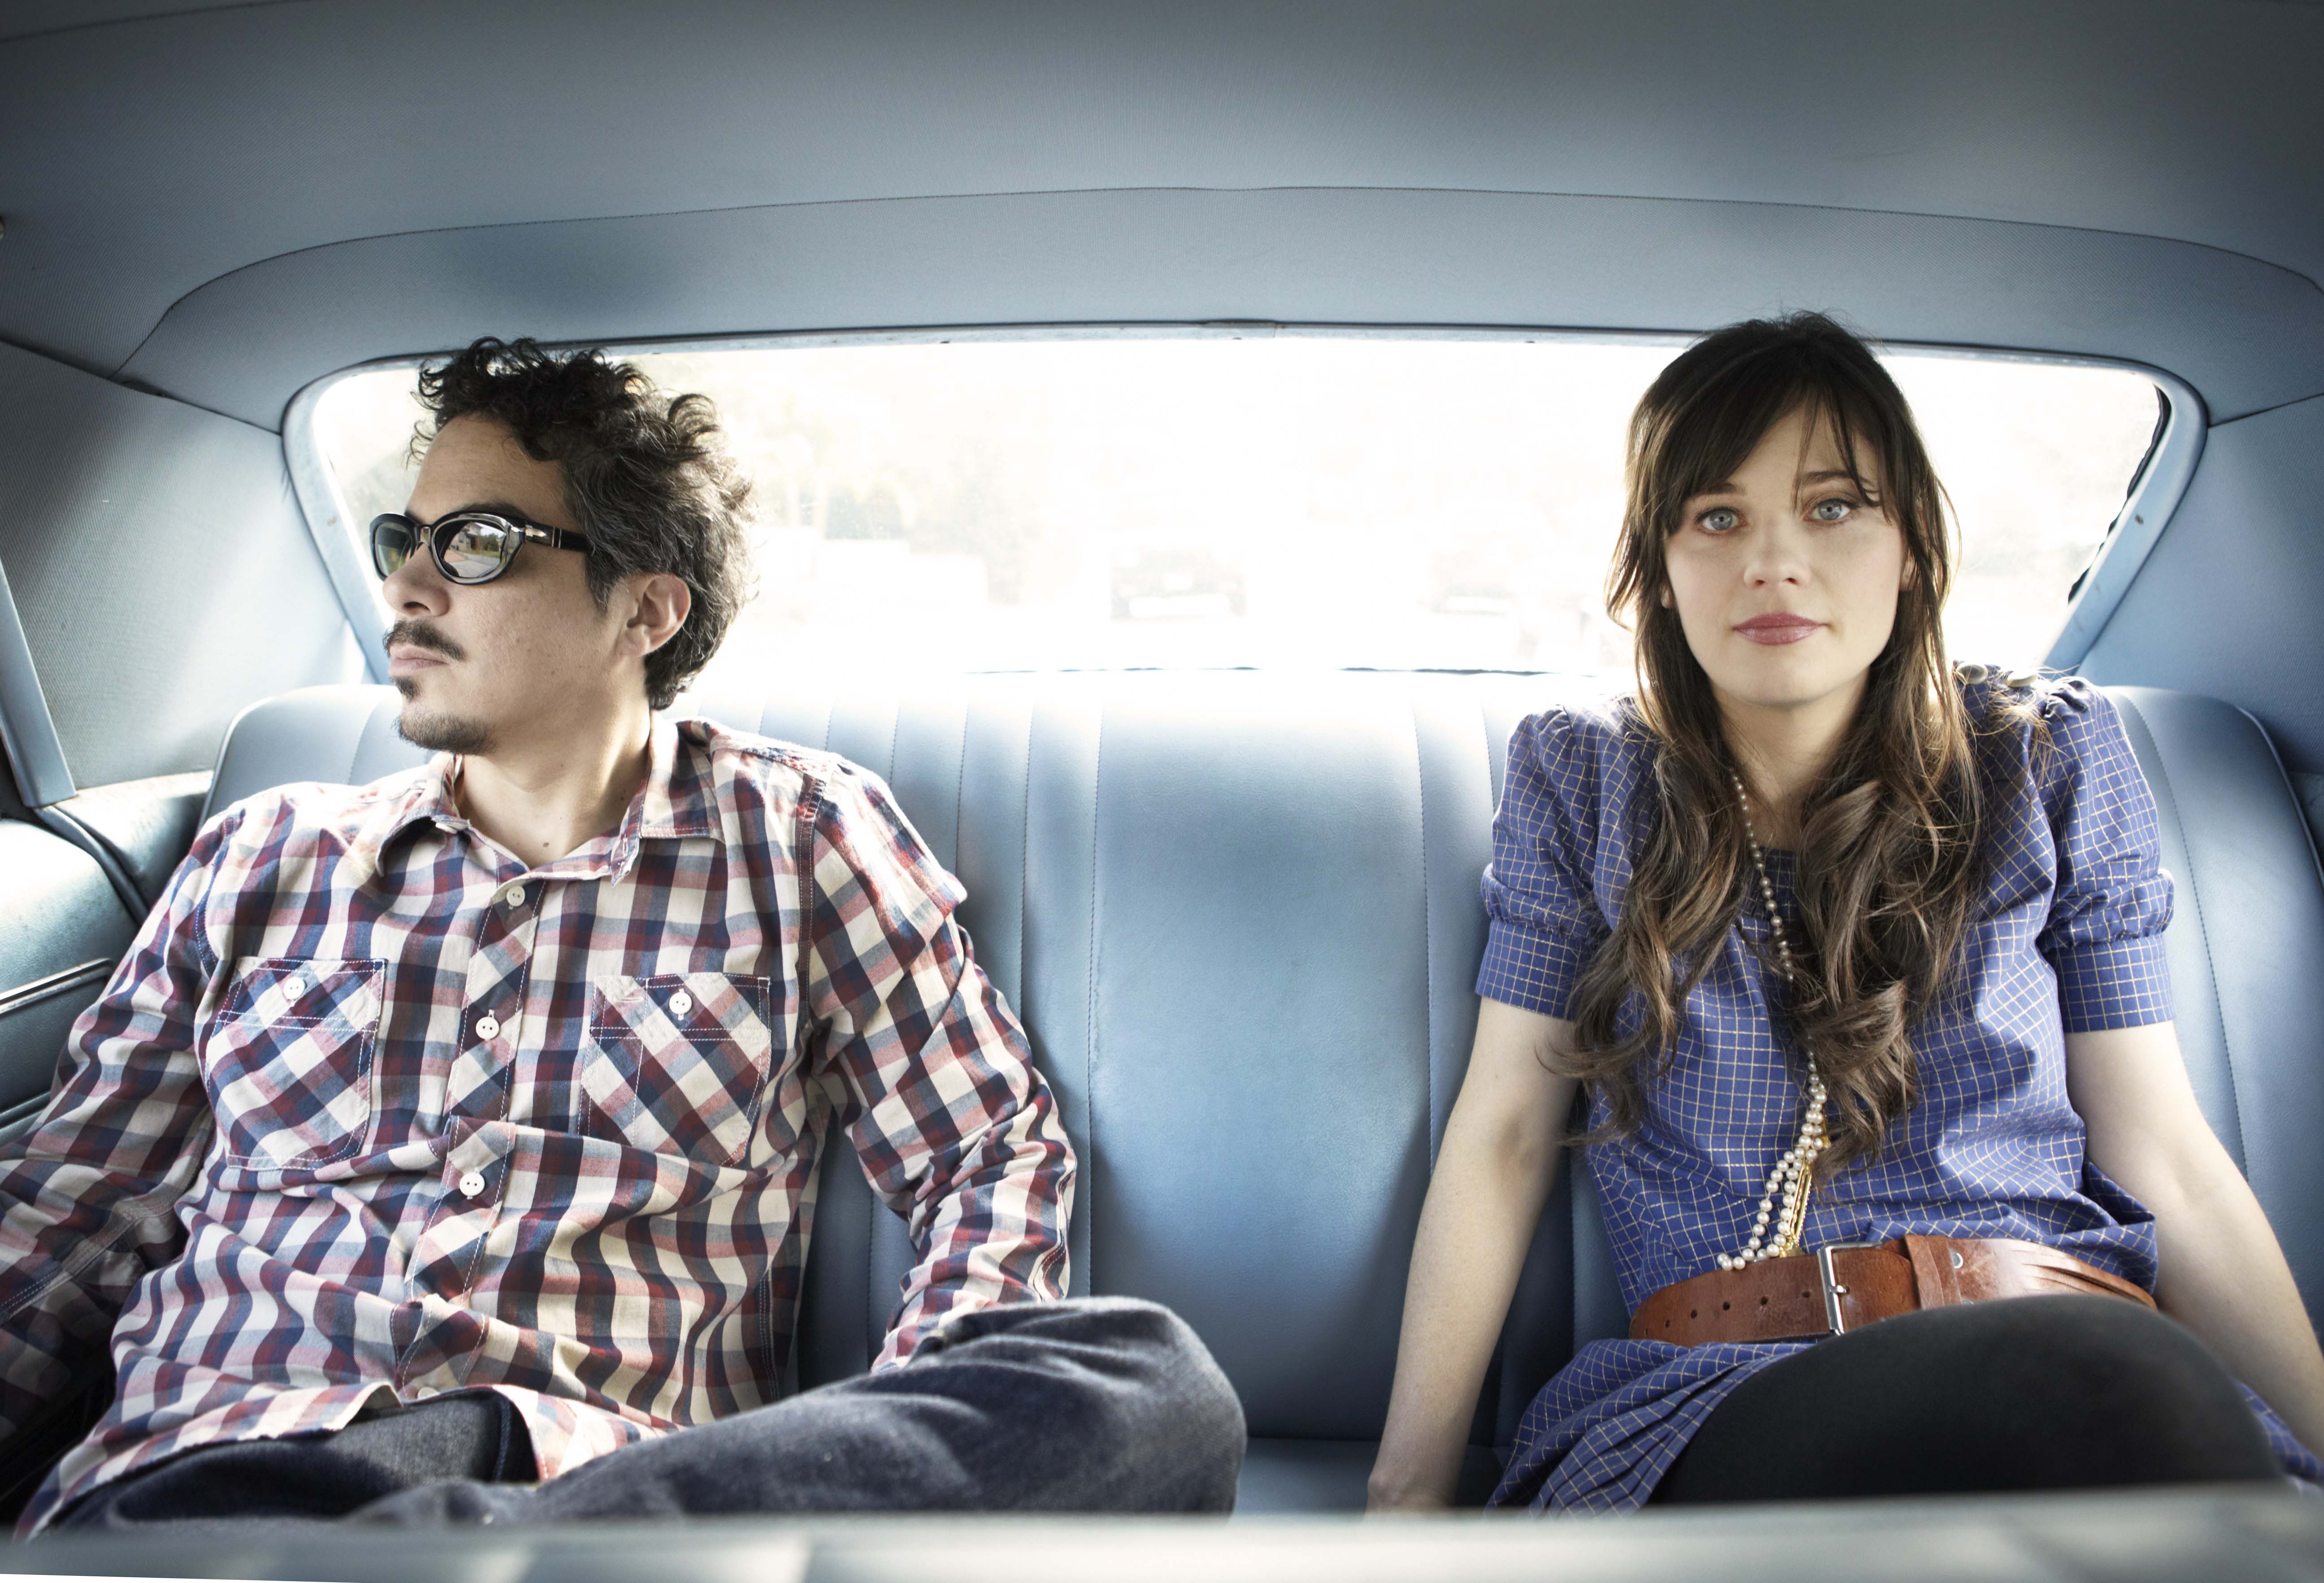 She and Him - Photo by Sam Jones